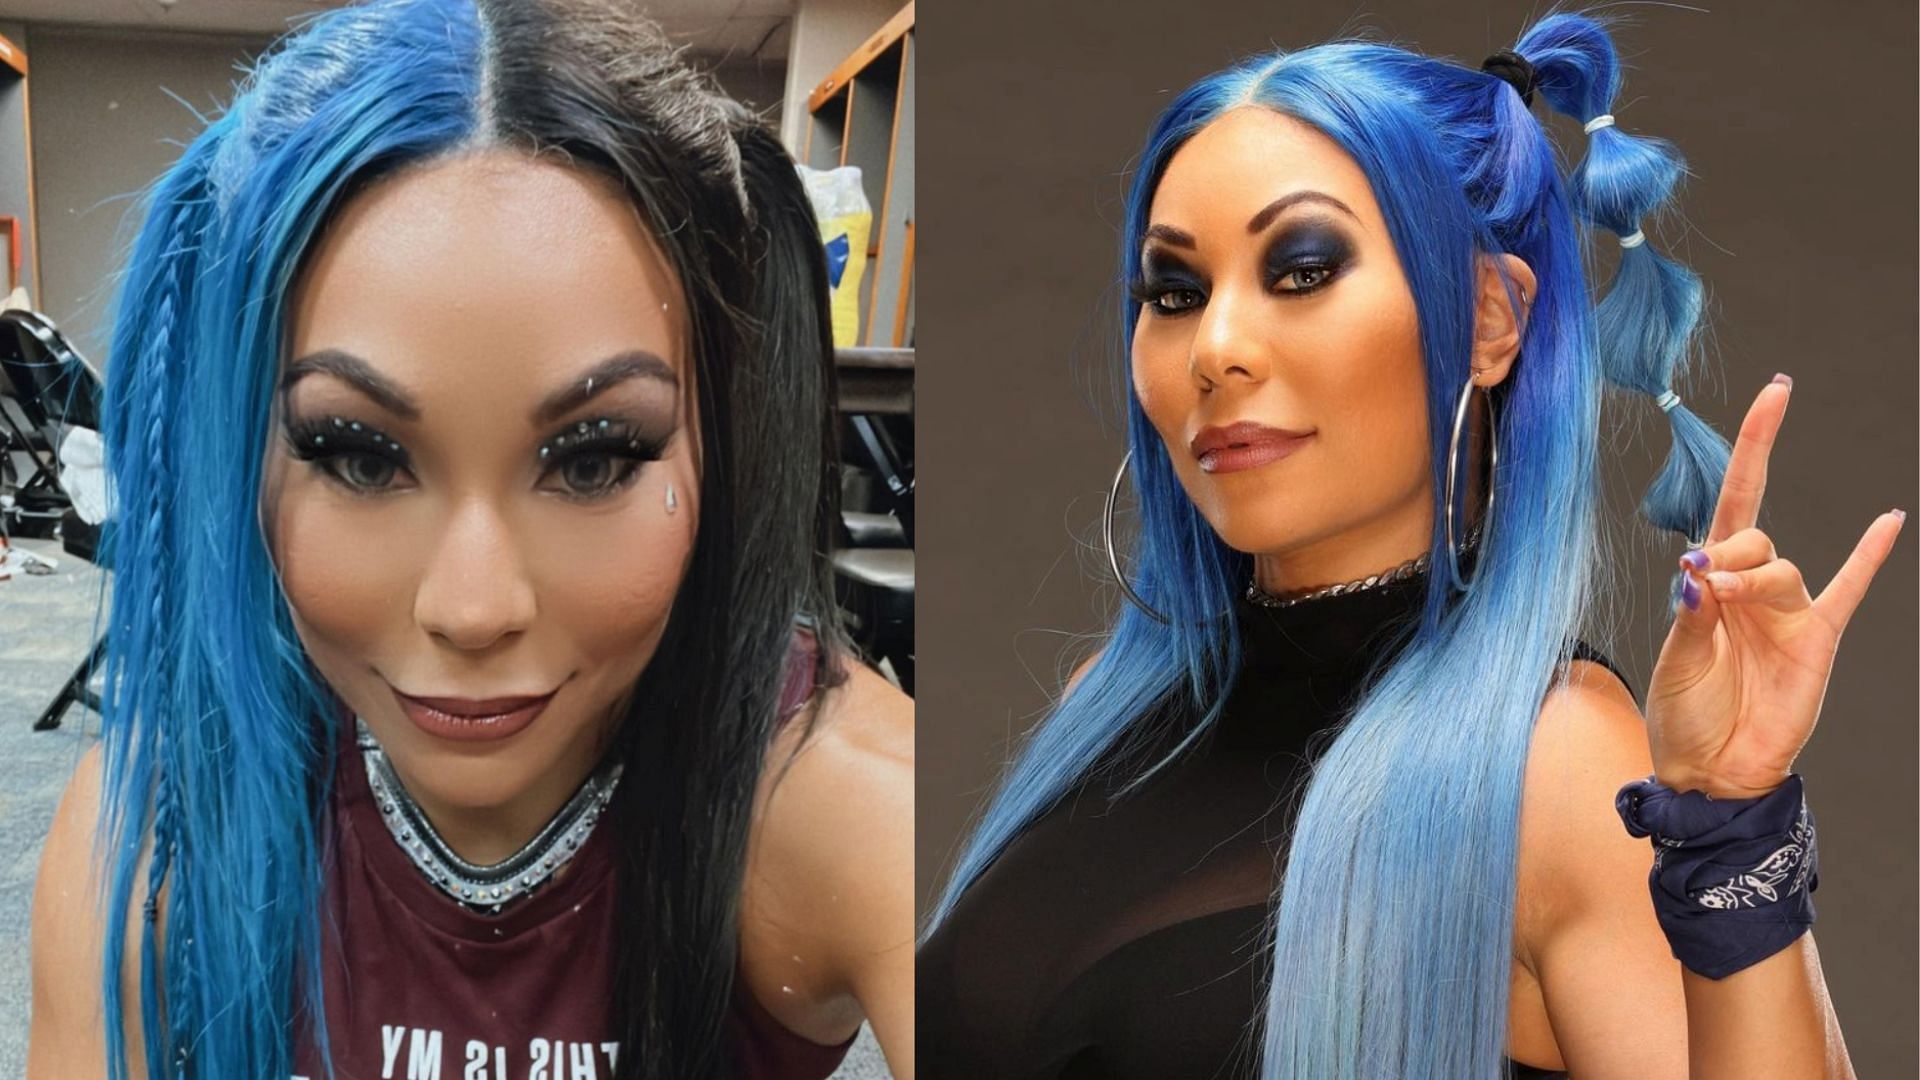 Mia Yim was selected by SmackDown in this year